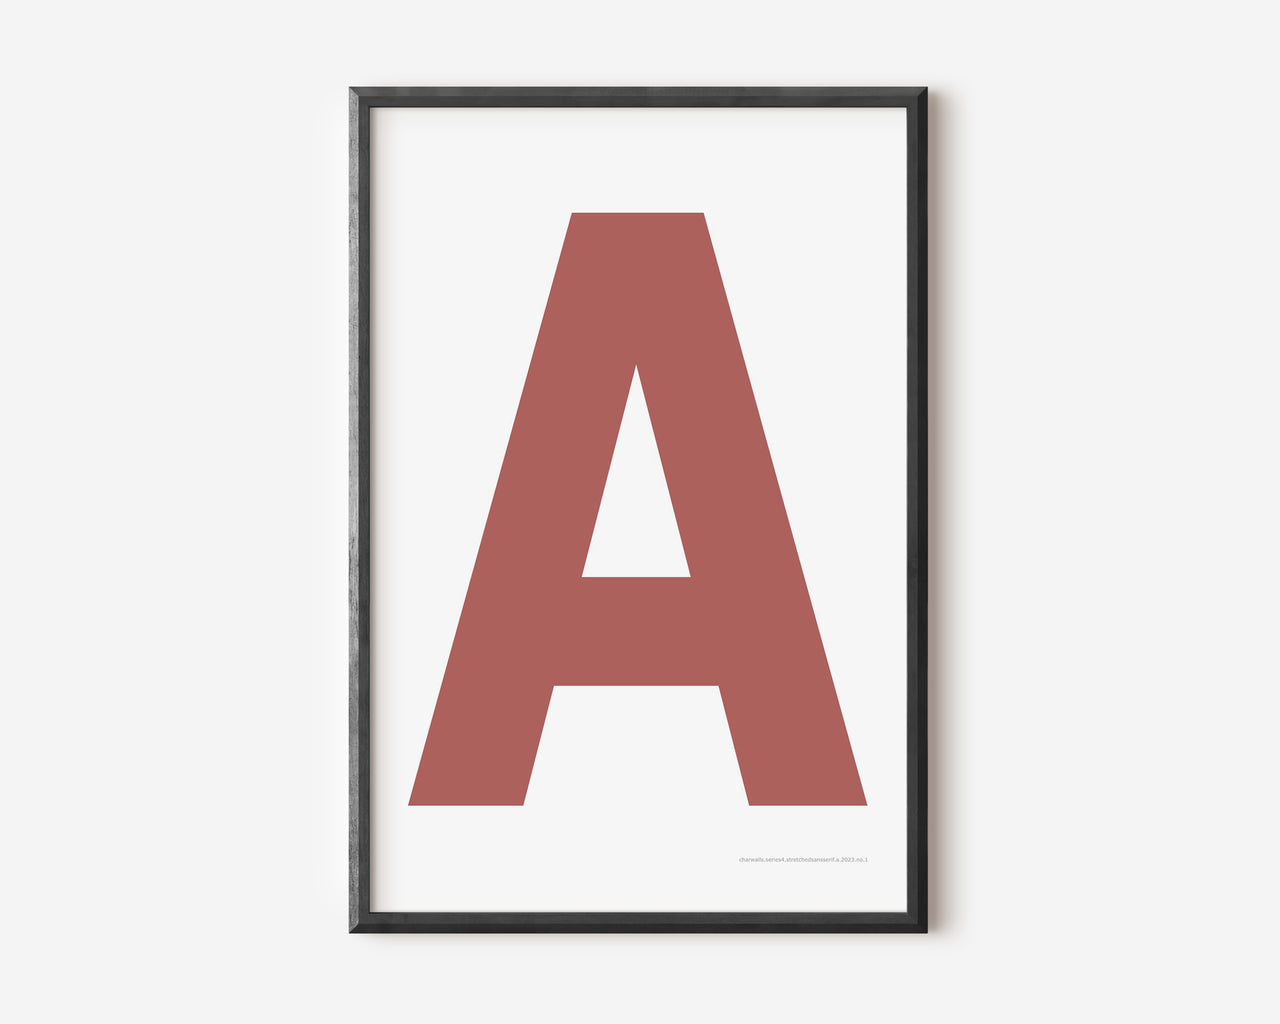 Modern art print with an uppercase Nantucket red letter A on a white background.